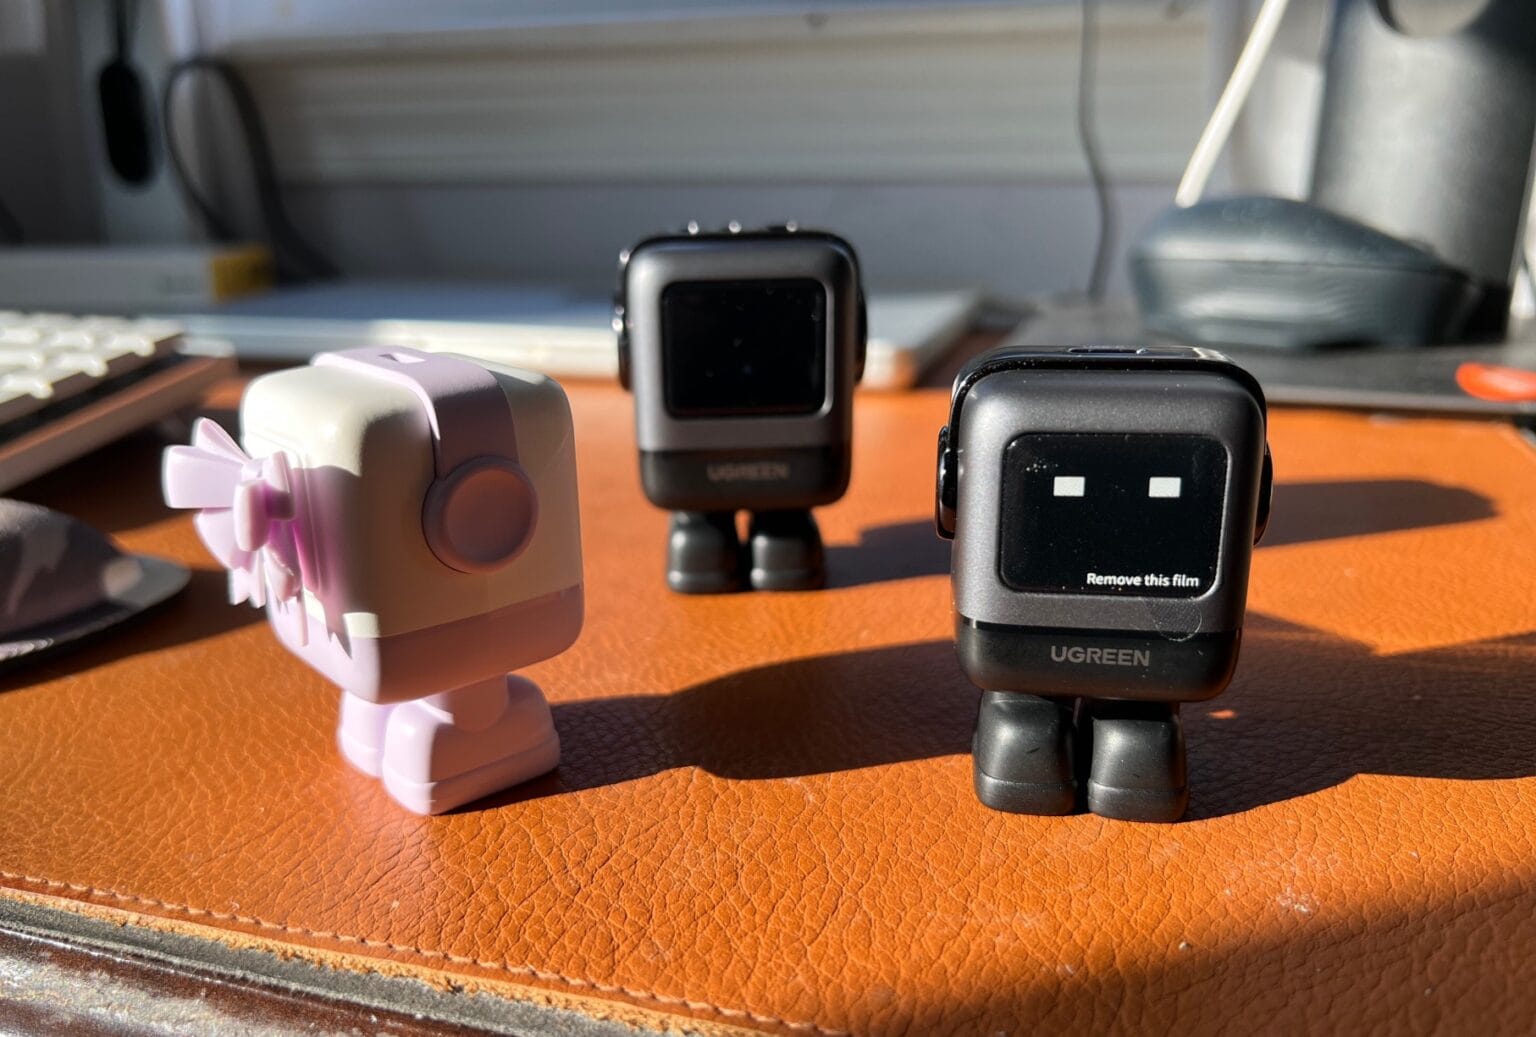 The adorable little charging bots come in 30W and 65W versions and black or purple colors.